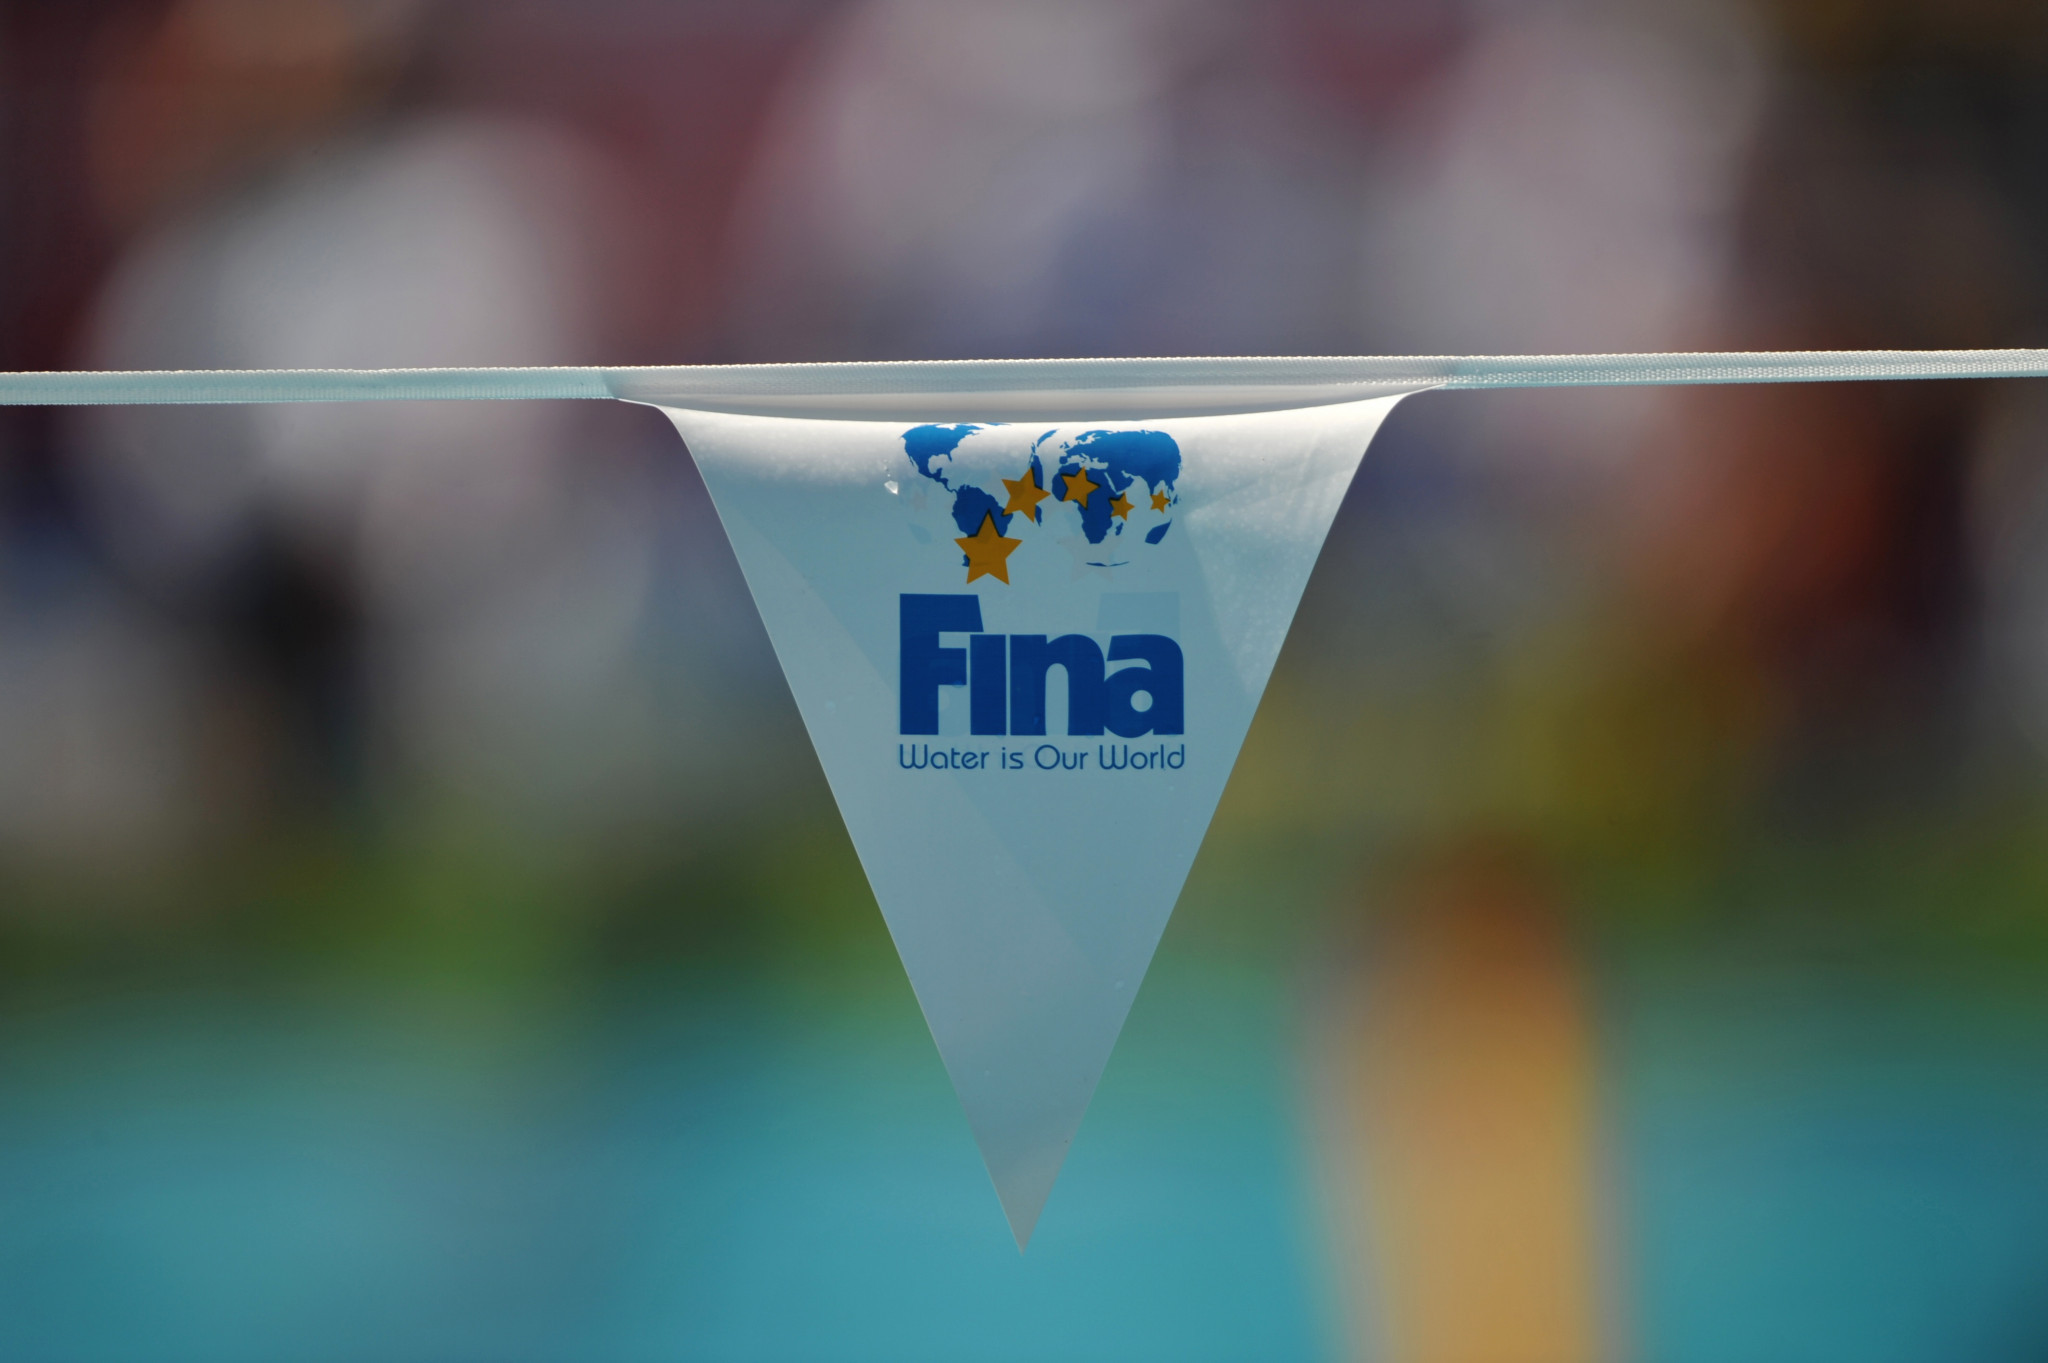 Kenya and Federated States of Micronesia temporarily suspended by FINA